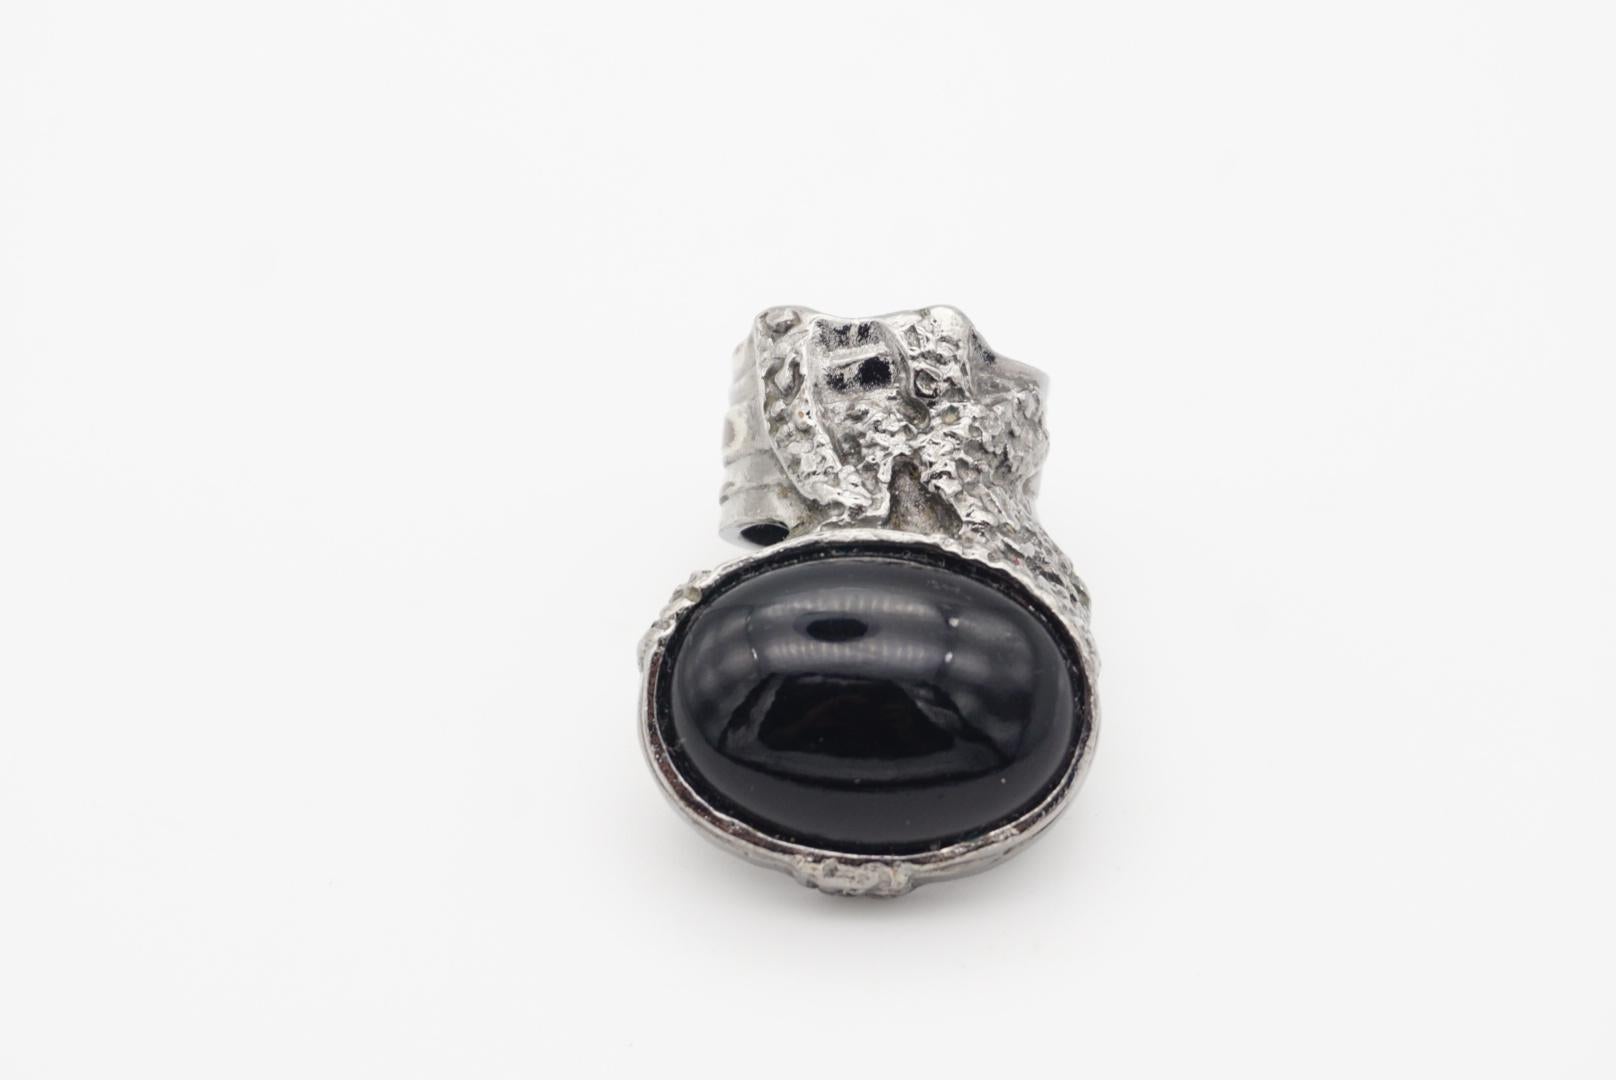 Yves Saint Laurent YSL Arty Black Cabochon Chunky Statement Silver Ring, Size 6 For Sale 4